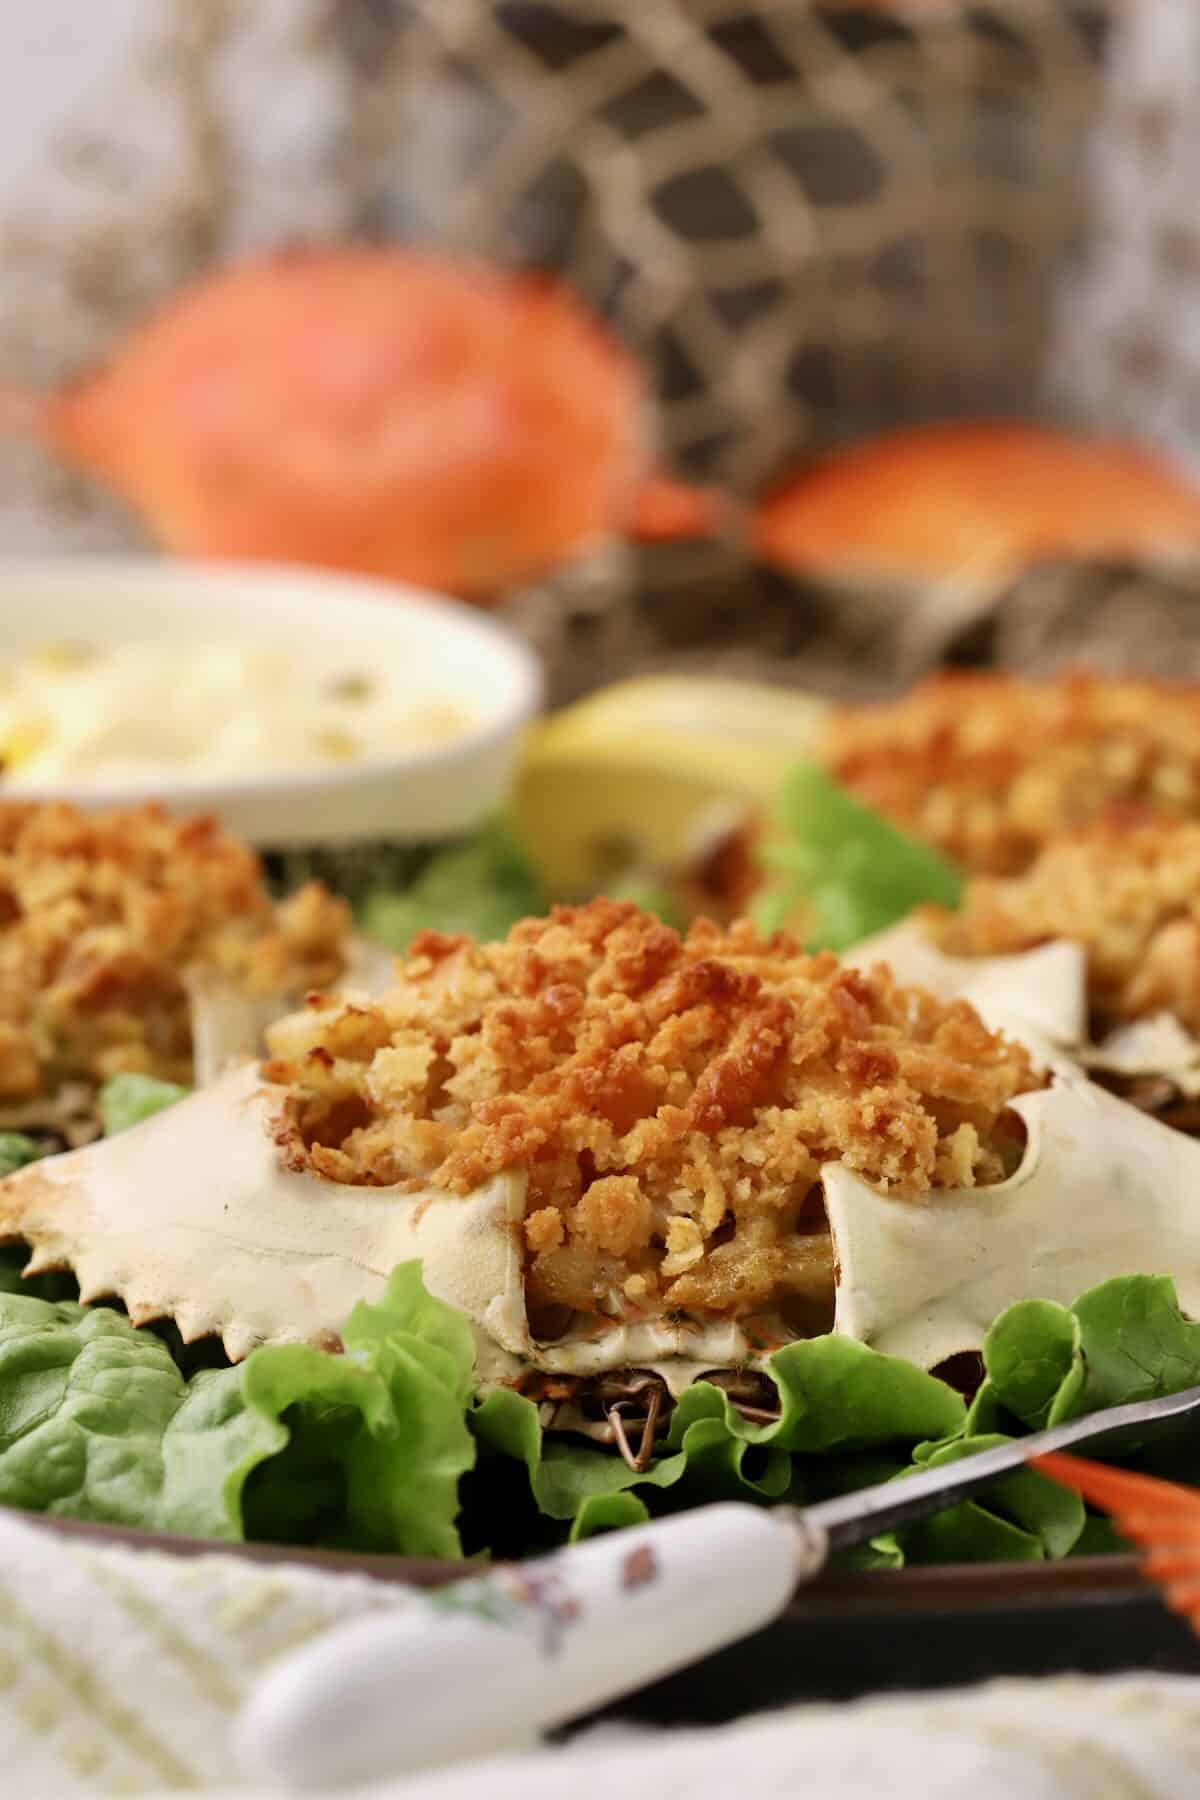 Deviled crab stuffed in a blue crab shell on a plate of lettuce leaves. 
